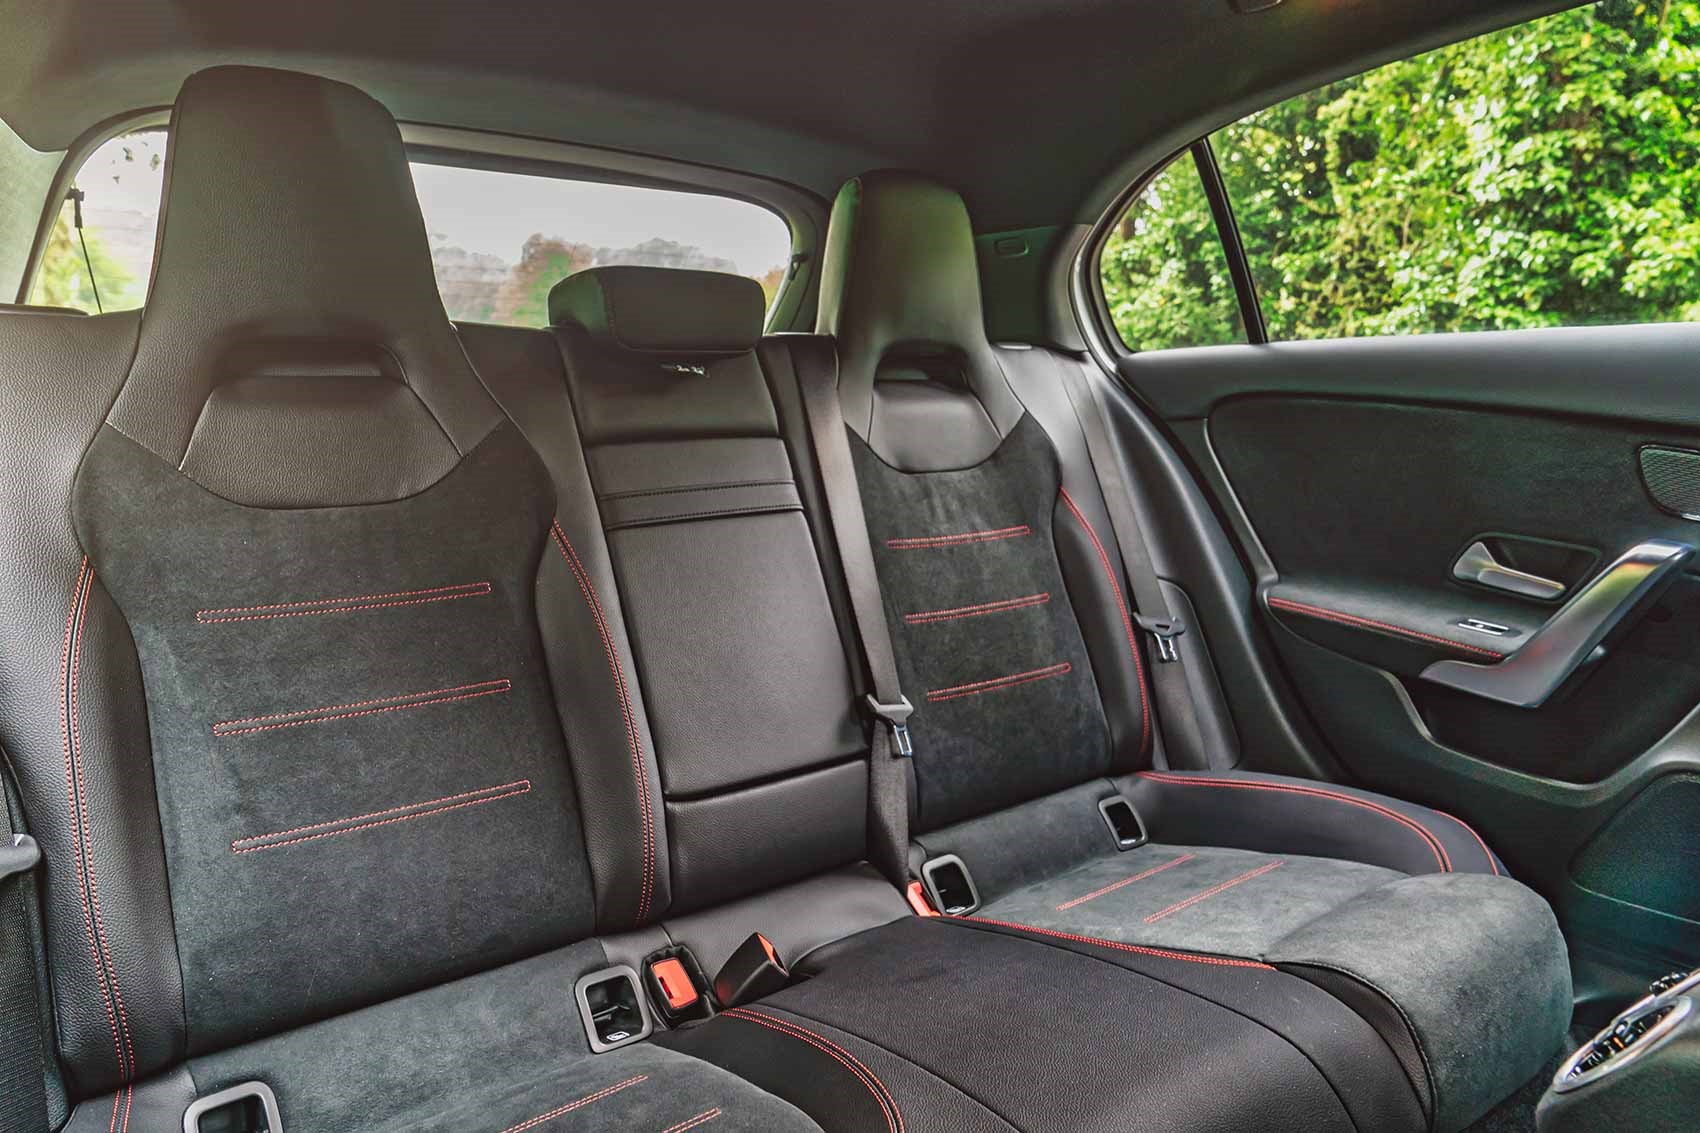 Rear seats in new 2018 Mercedes-Benz A-class hatchback: shown here in AMG spec